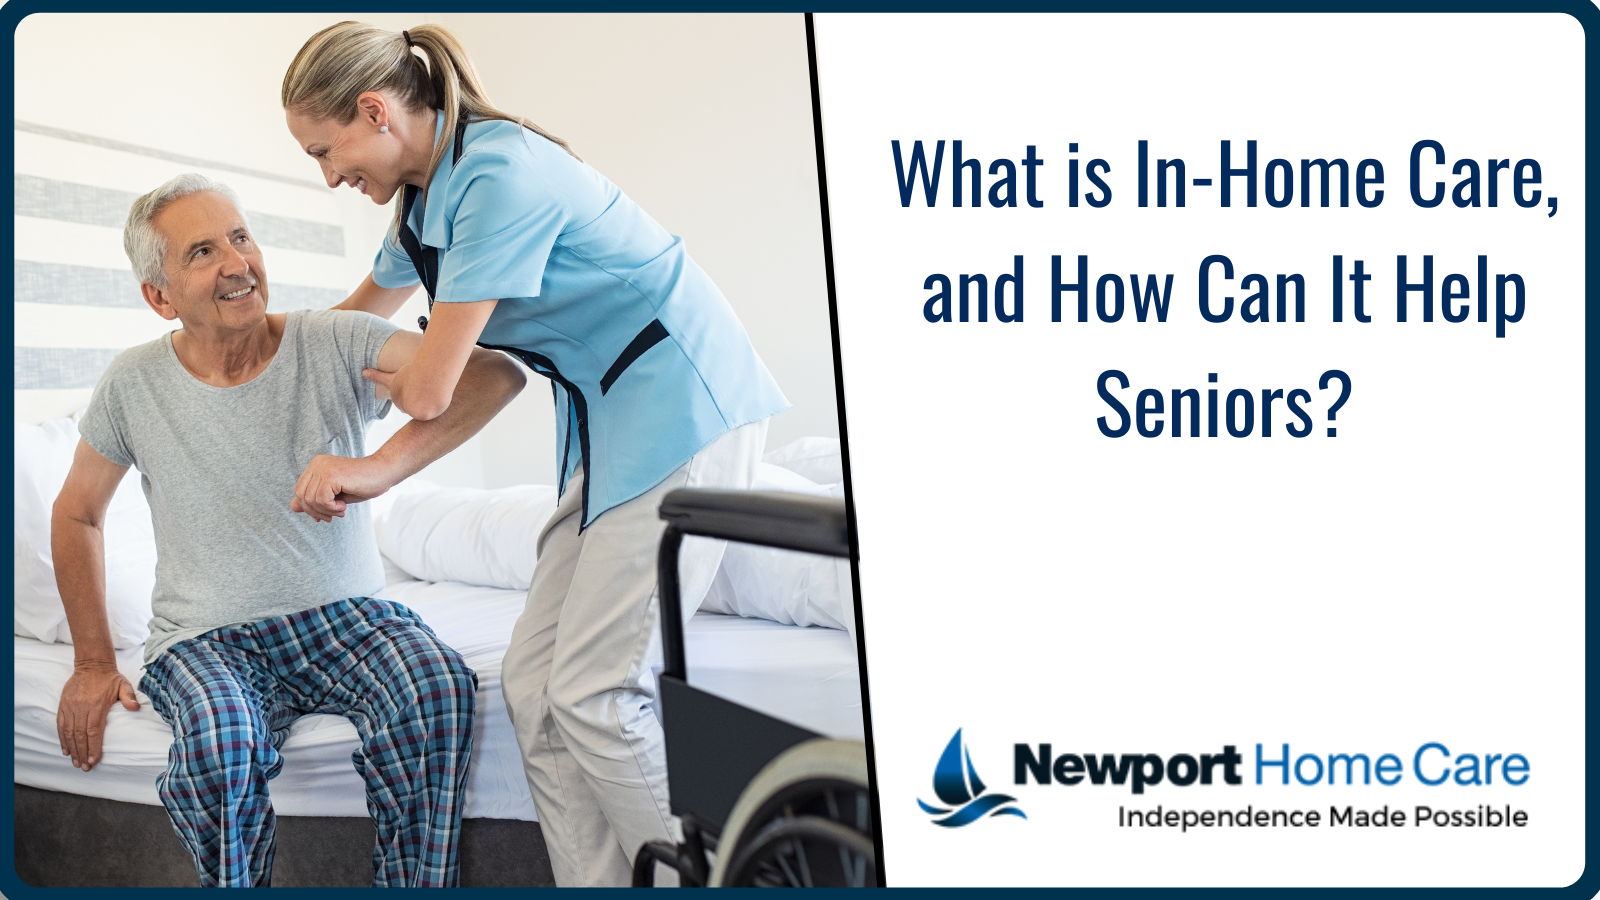 What is In-Home Care, and How Can It Help Seniors?